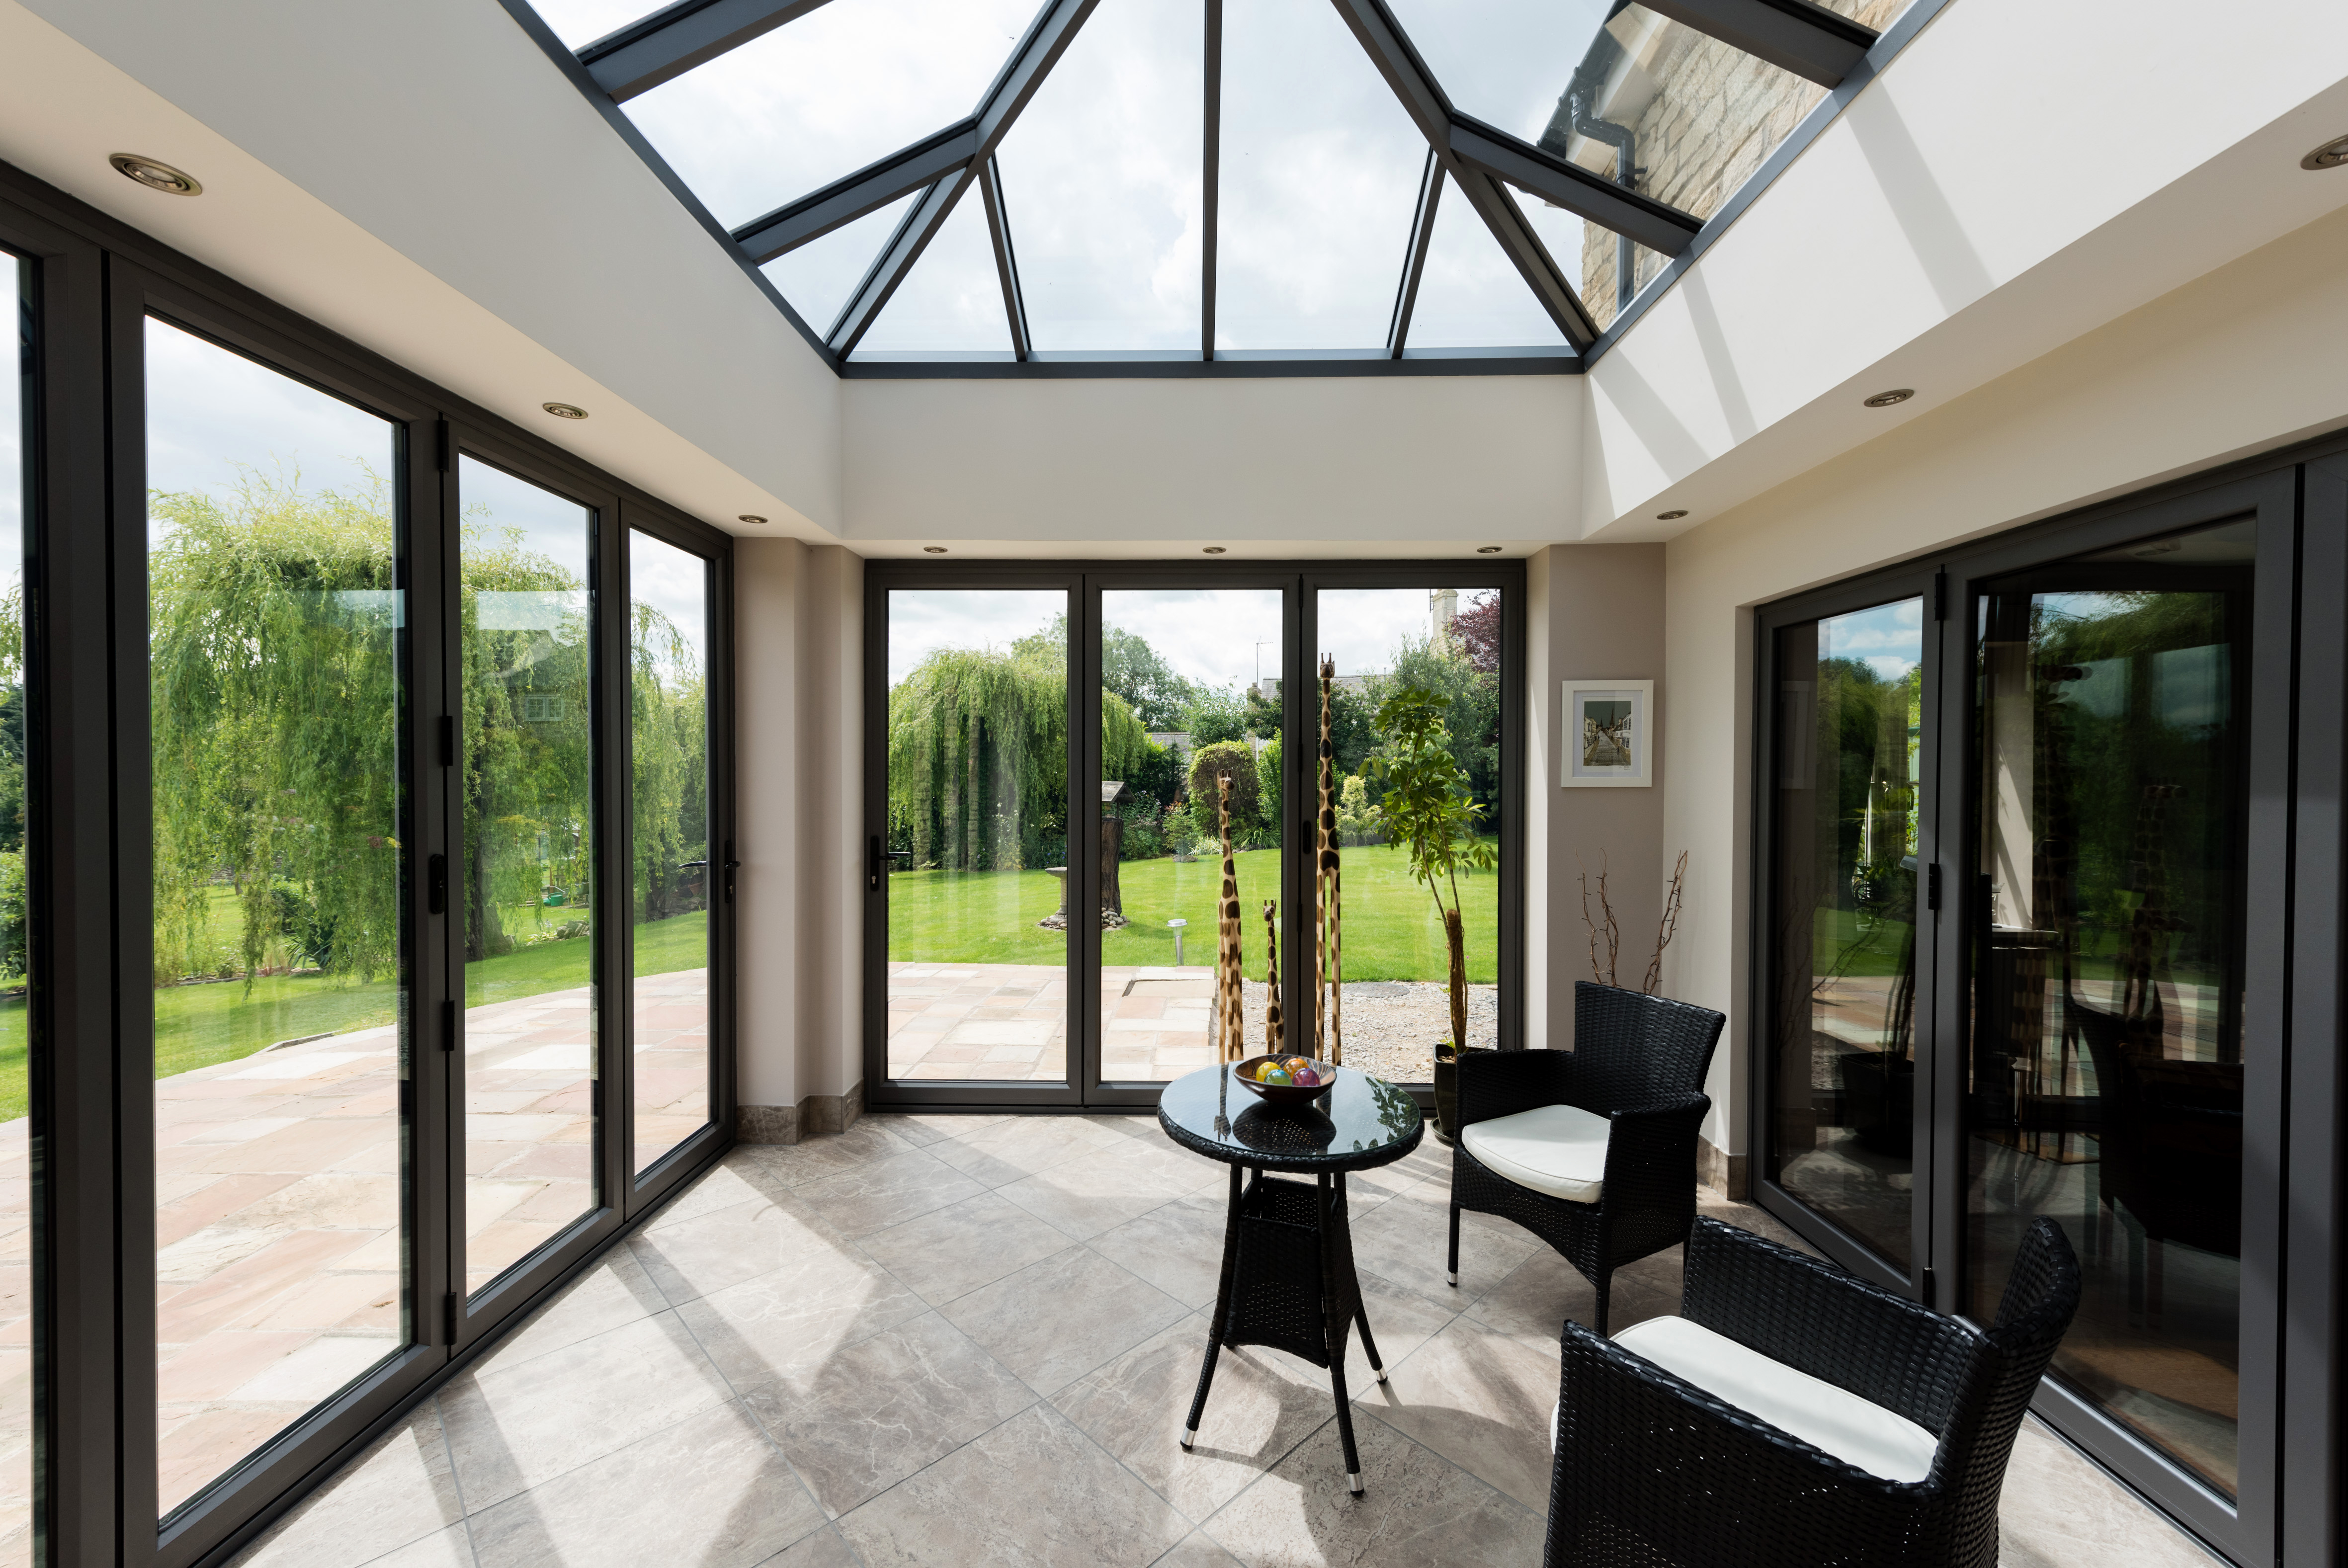 Bright and spacious Livin room conservatory design.